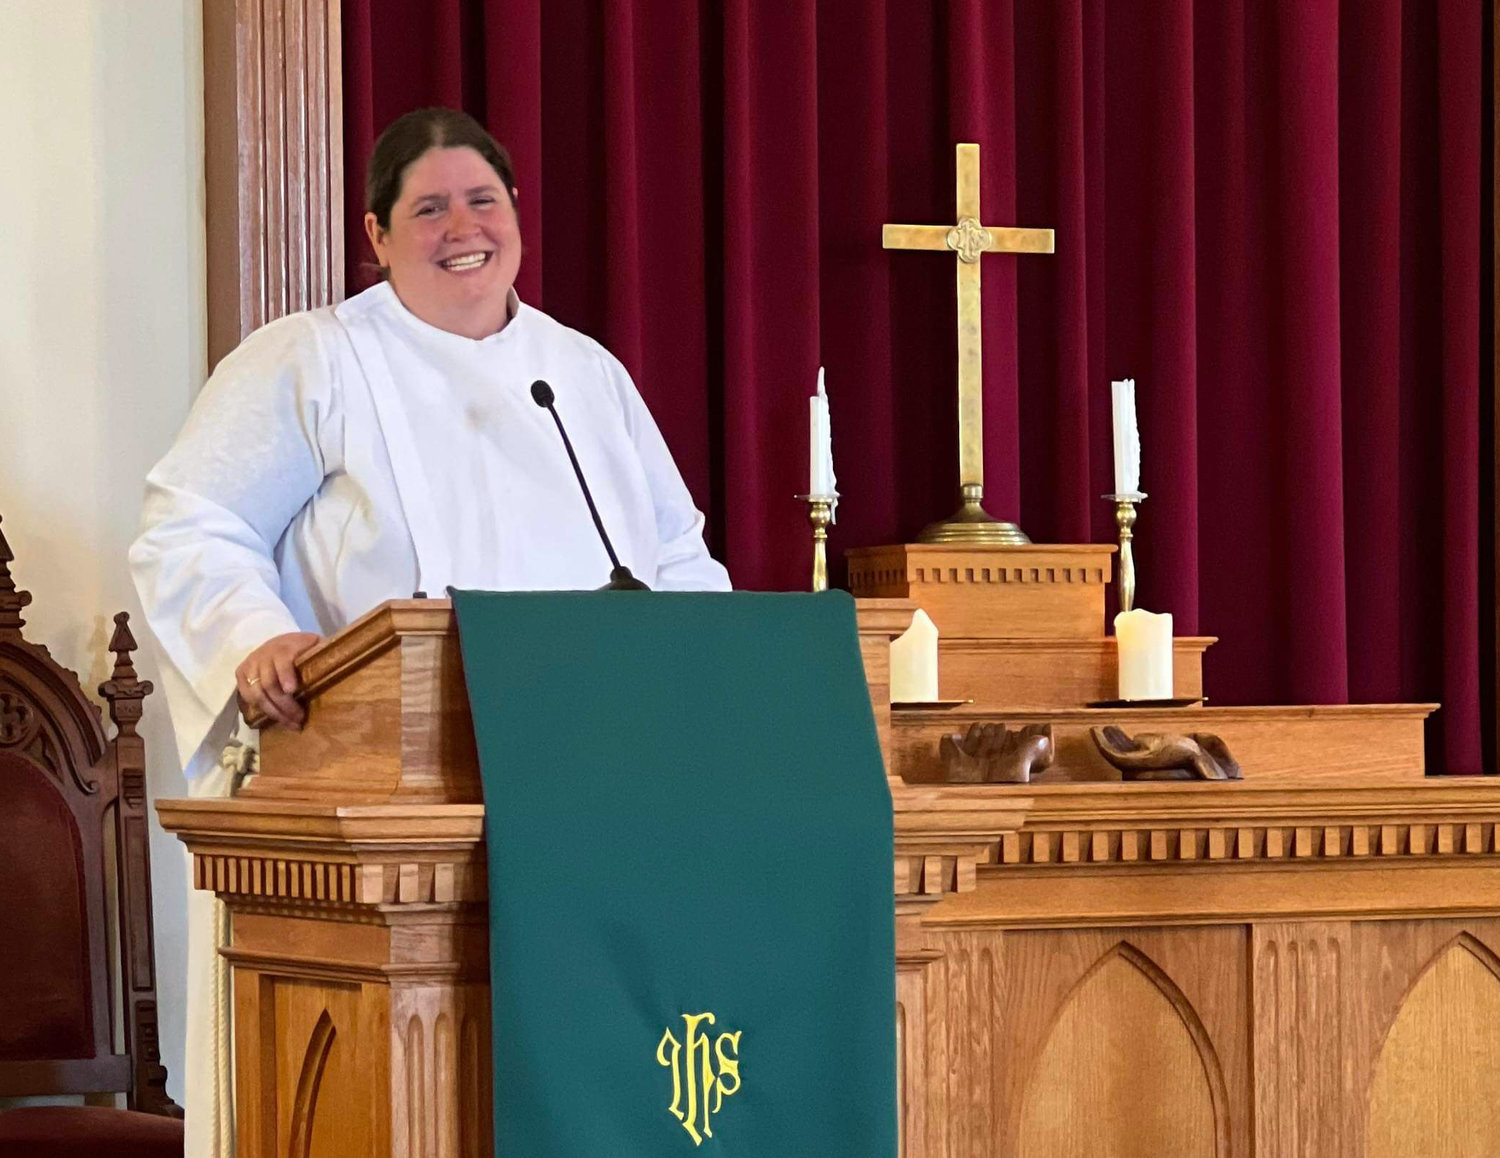 Kate Galop, pastor of the Westport Point United Methodist Church, speaks to the congregation during her last service this past Sunday, June 26.